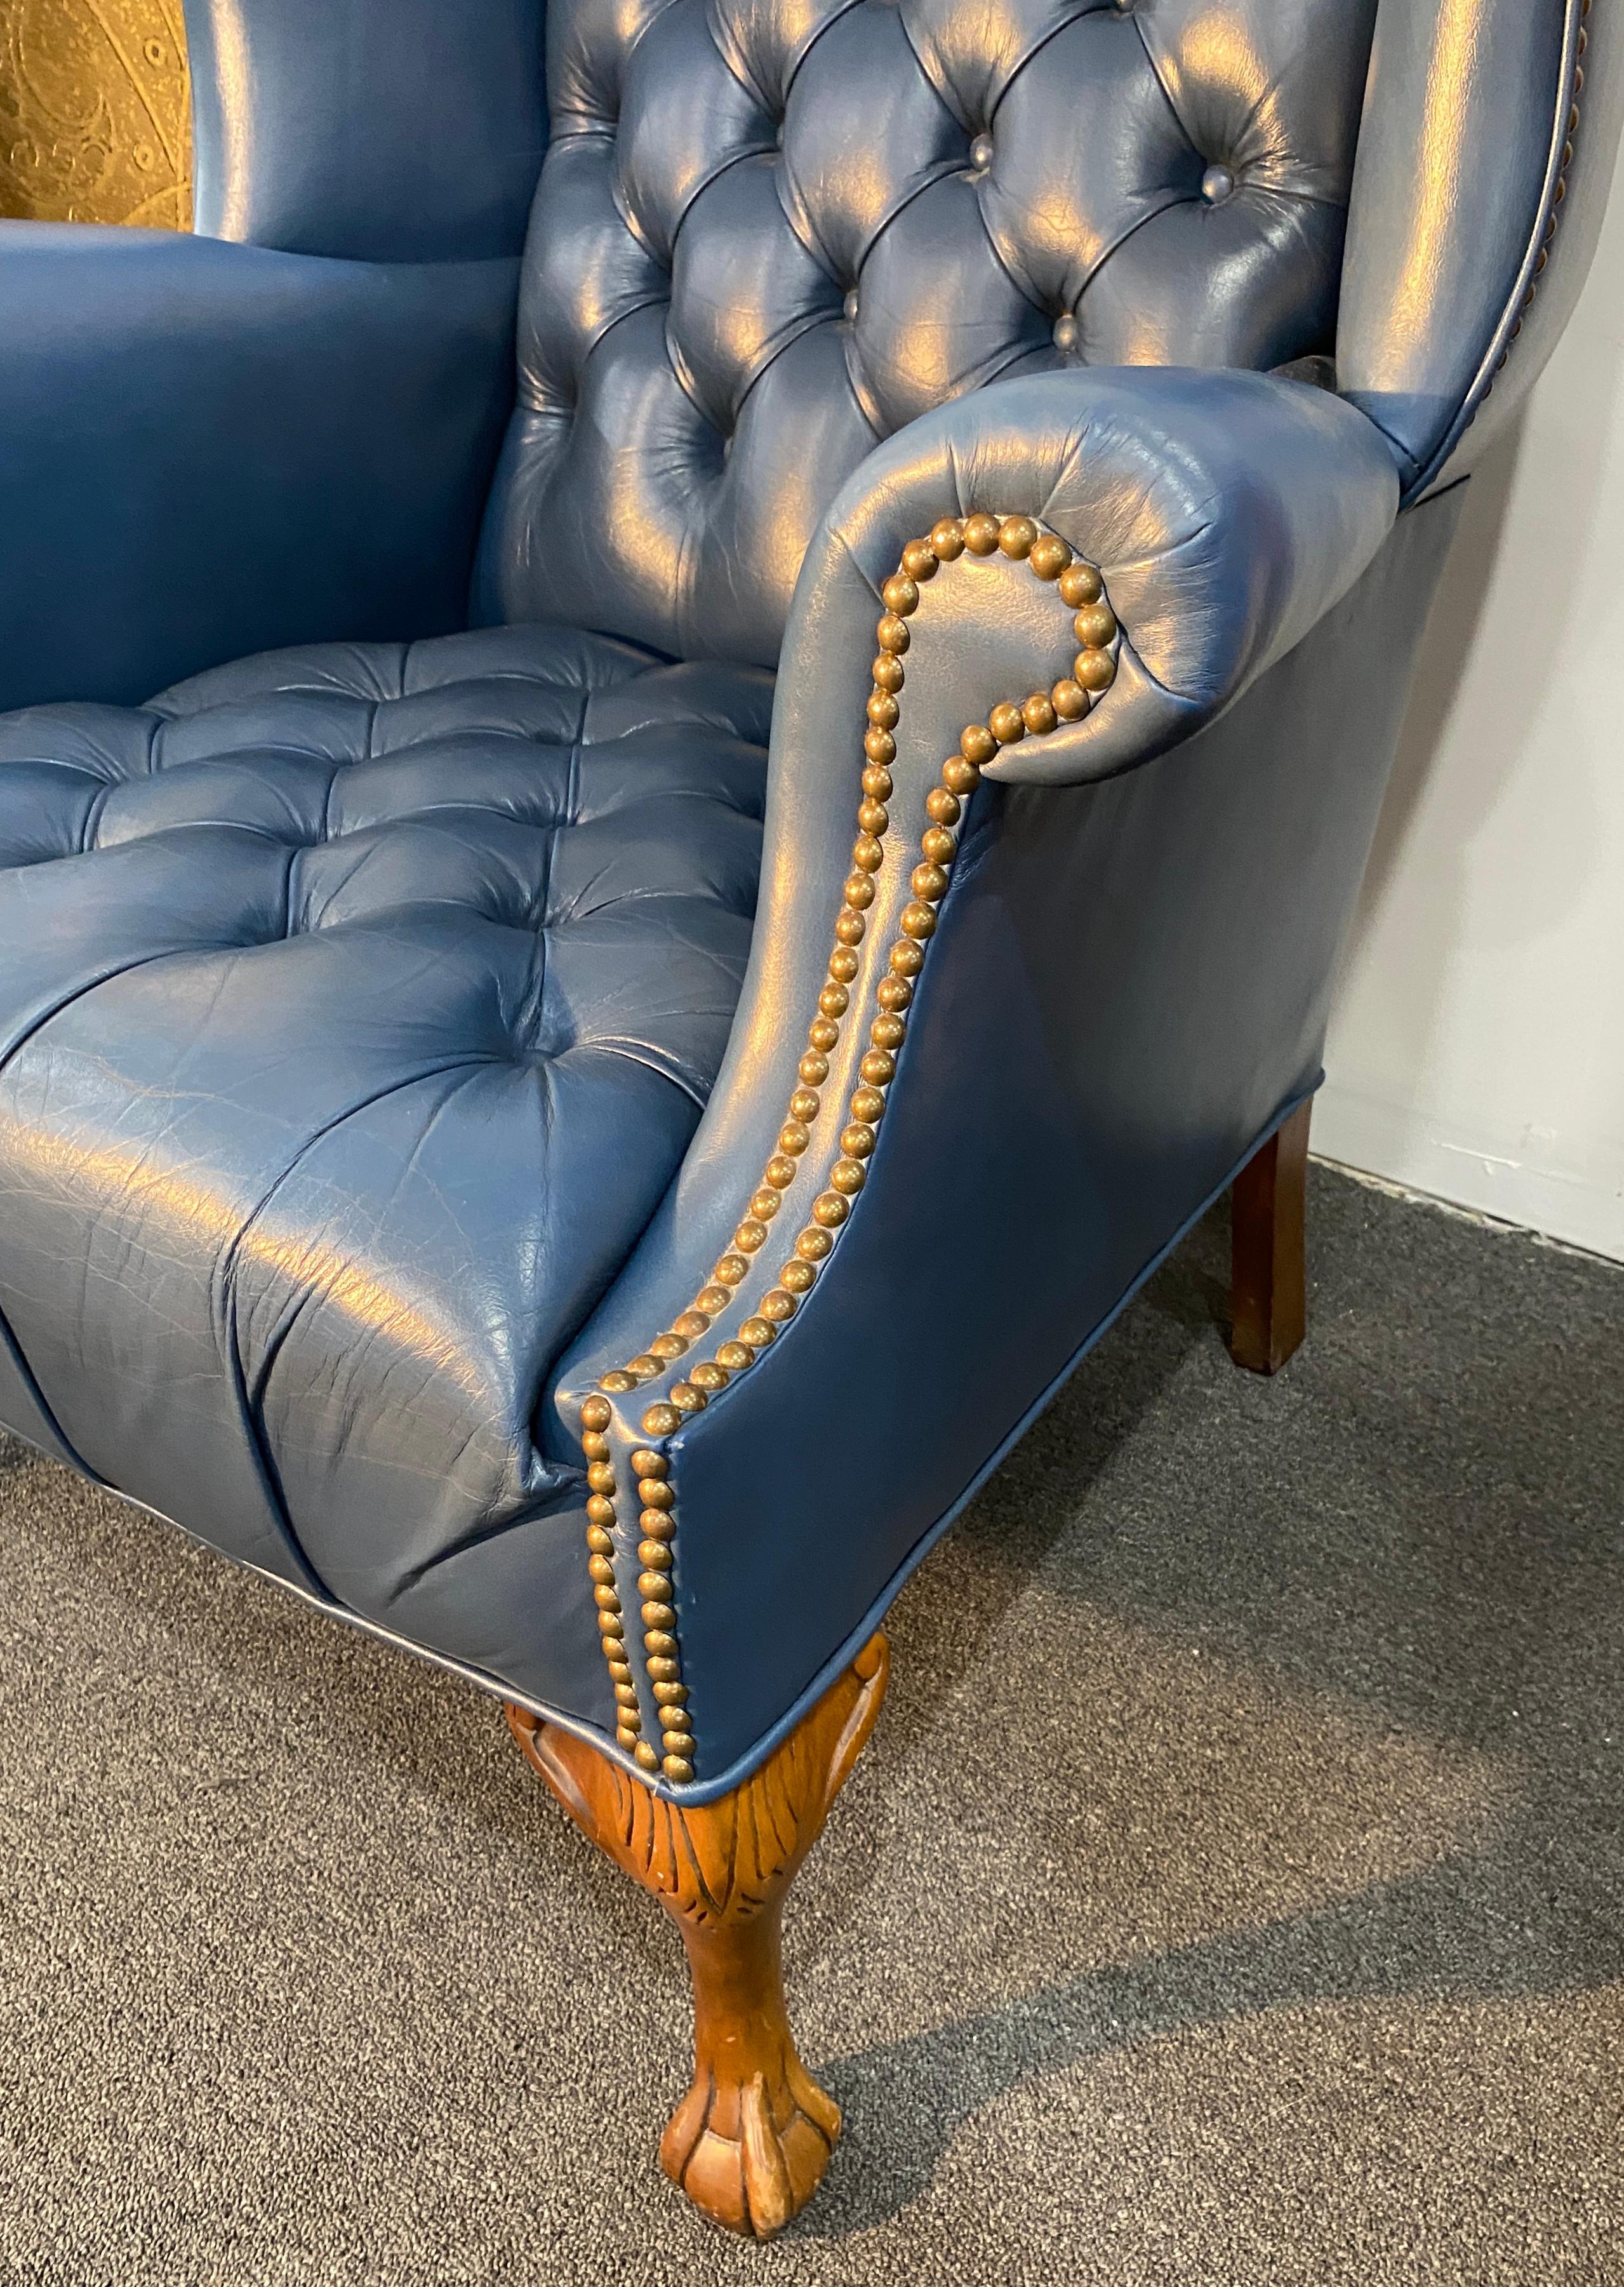 A fine quality and lovely Chesterfield style hand dyed slate blue leather library club reading armchair with ottoman. 

A great looking and decorative pair with a lovely Victorian Gentleman’s club look and feel. This Chesterfield Tufted Slate Blue